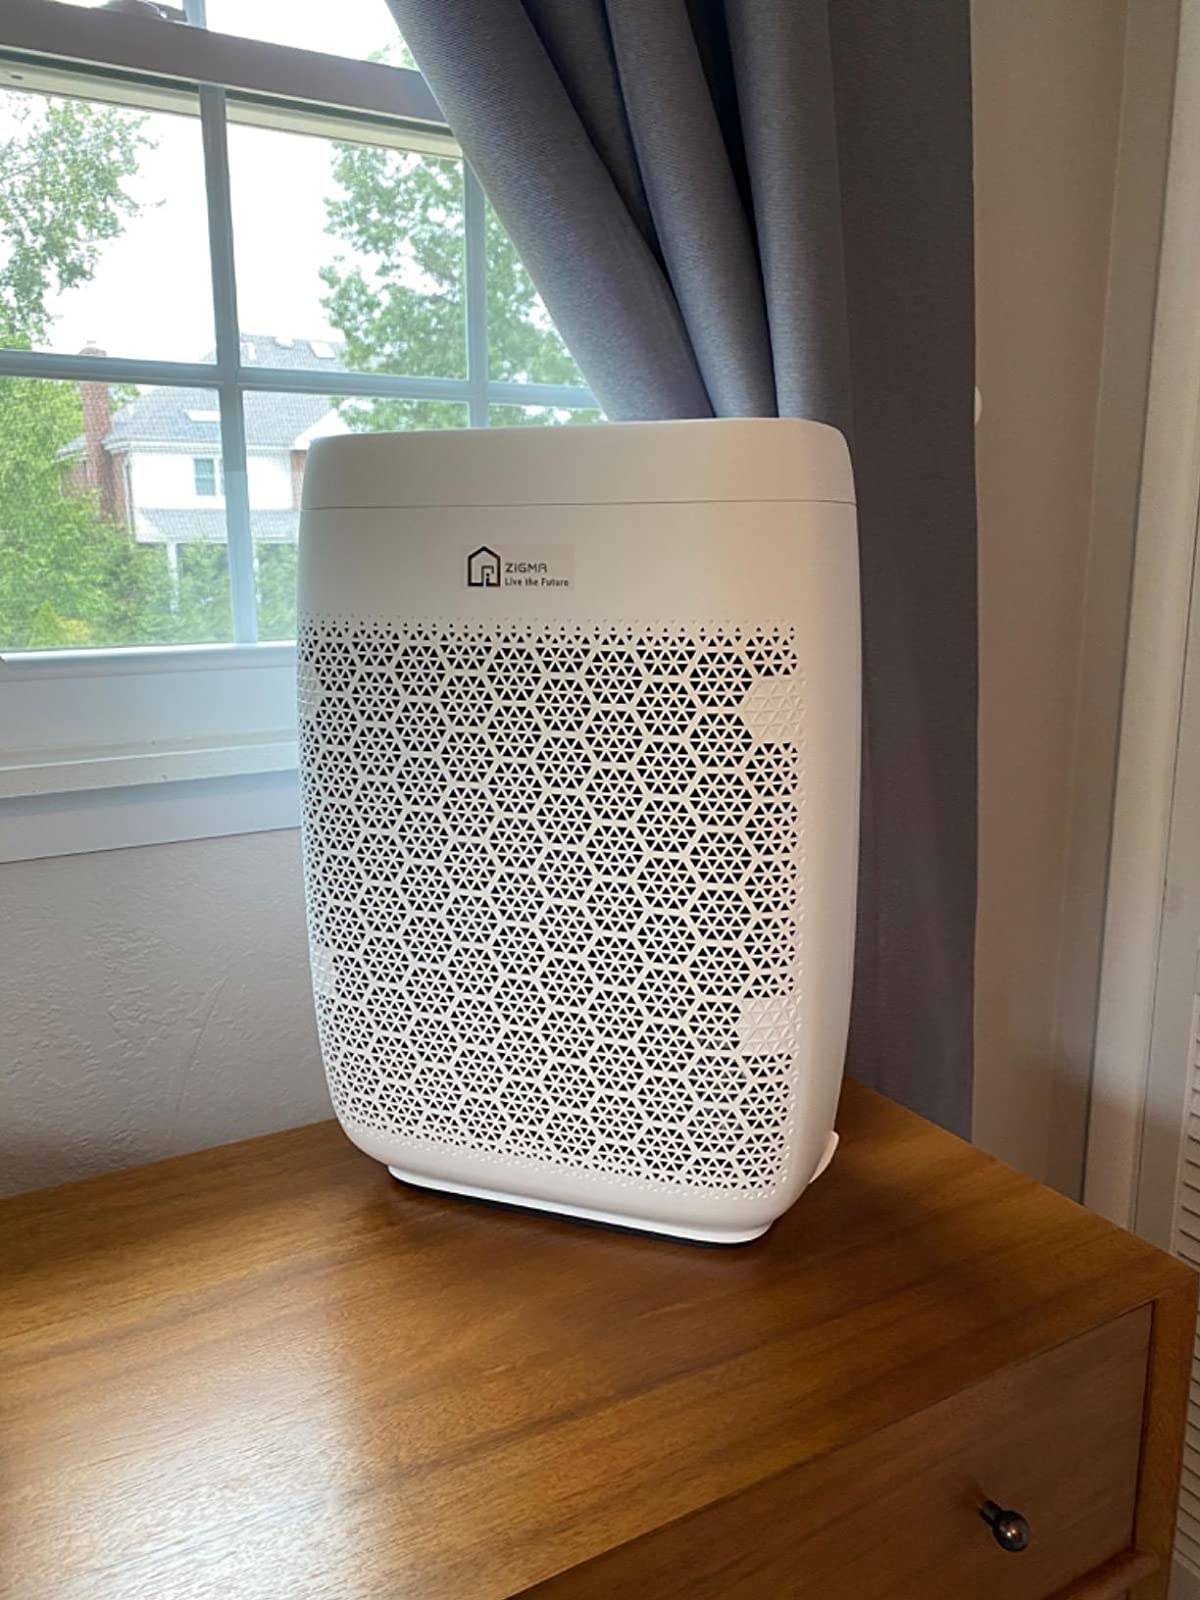 the air purifier sitting on top of a dresser